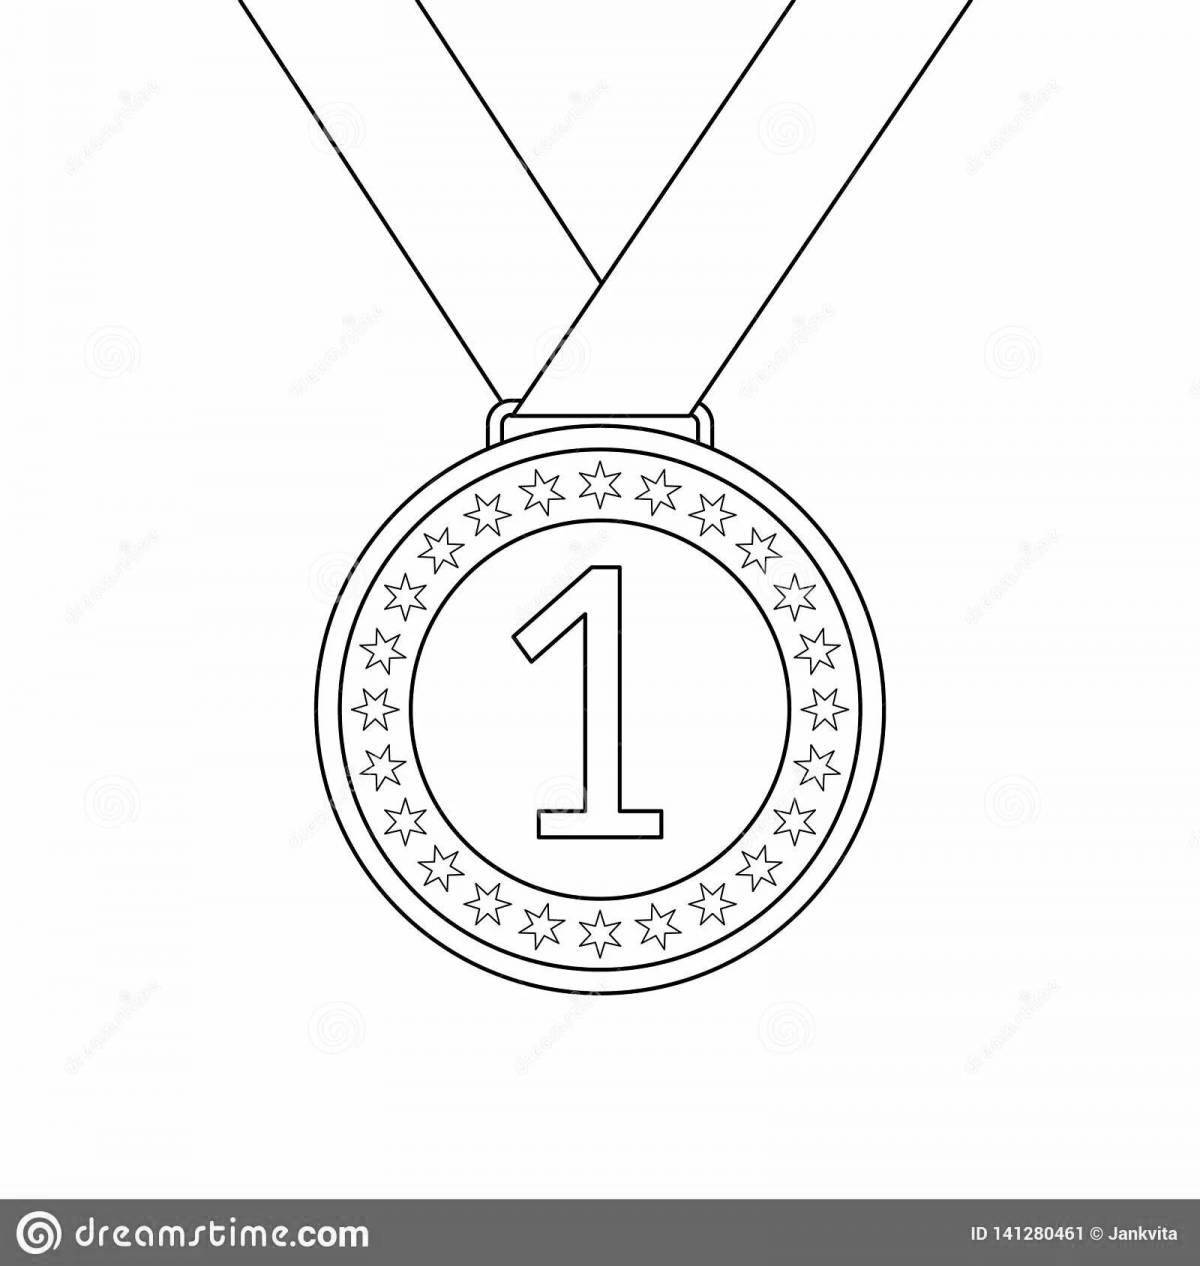 Radiant medal coloring page